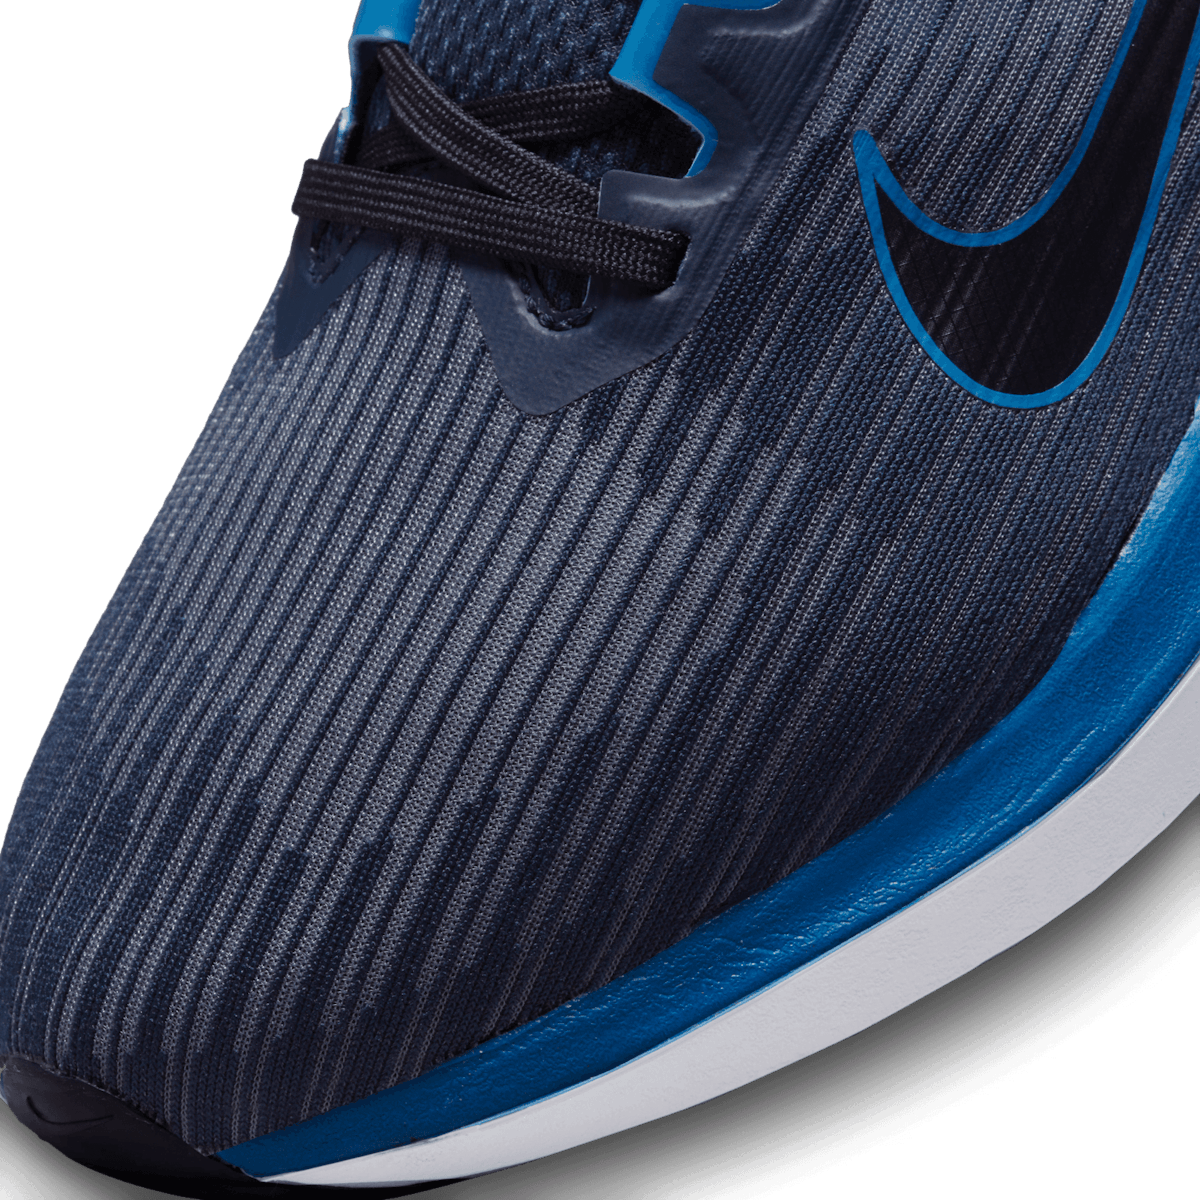 Nike Winflo 9 Road Running Shoes in Blue Angle 4